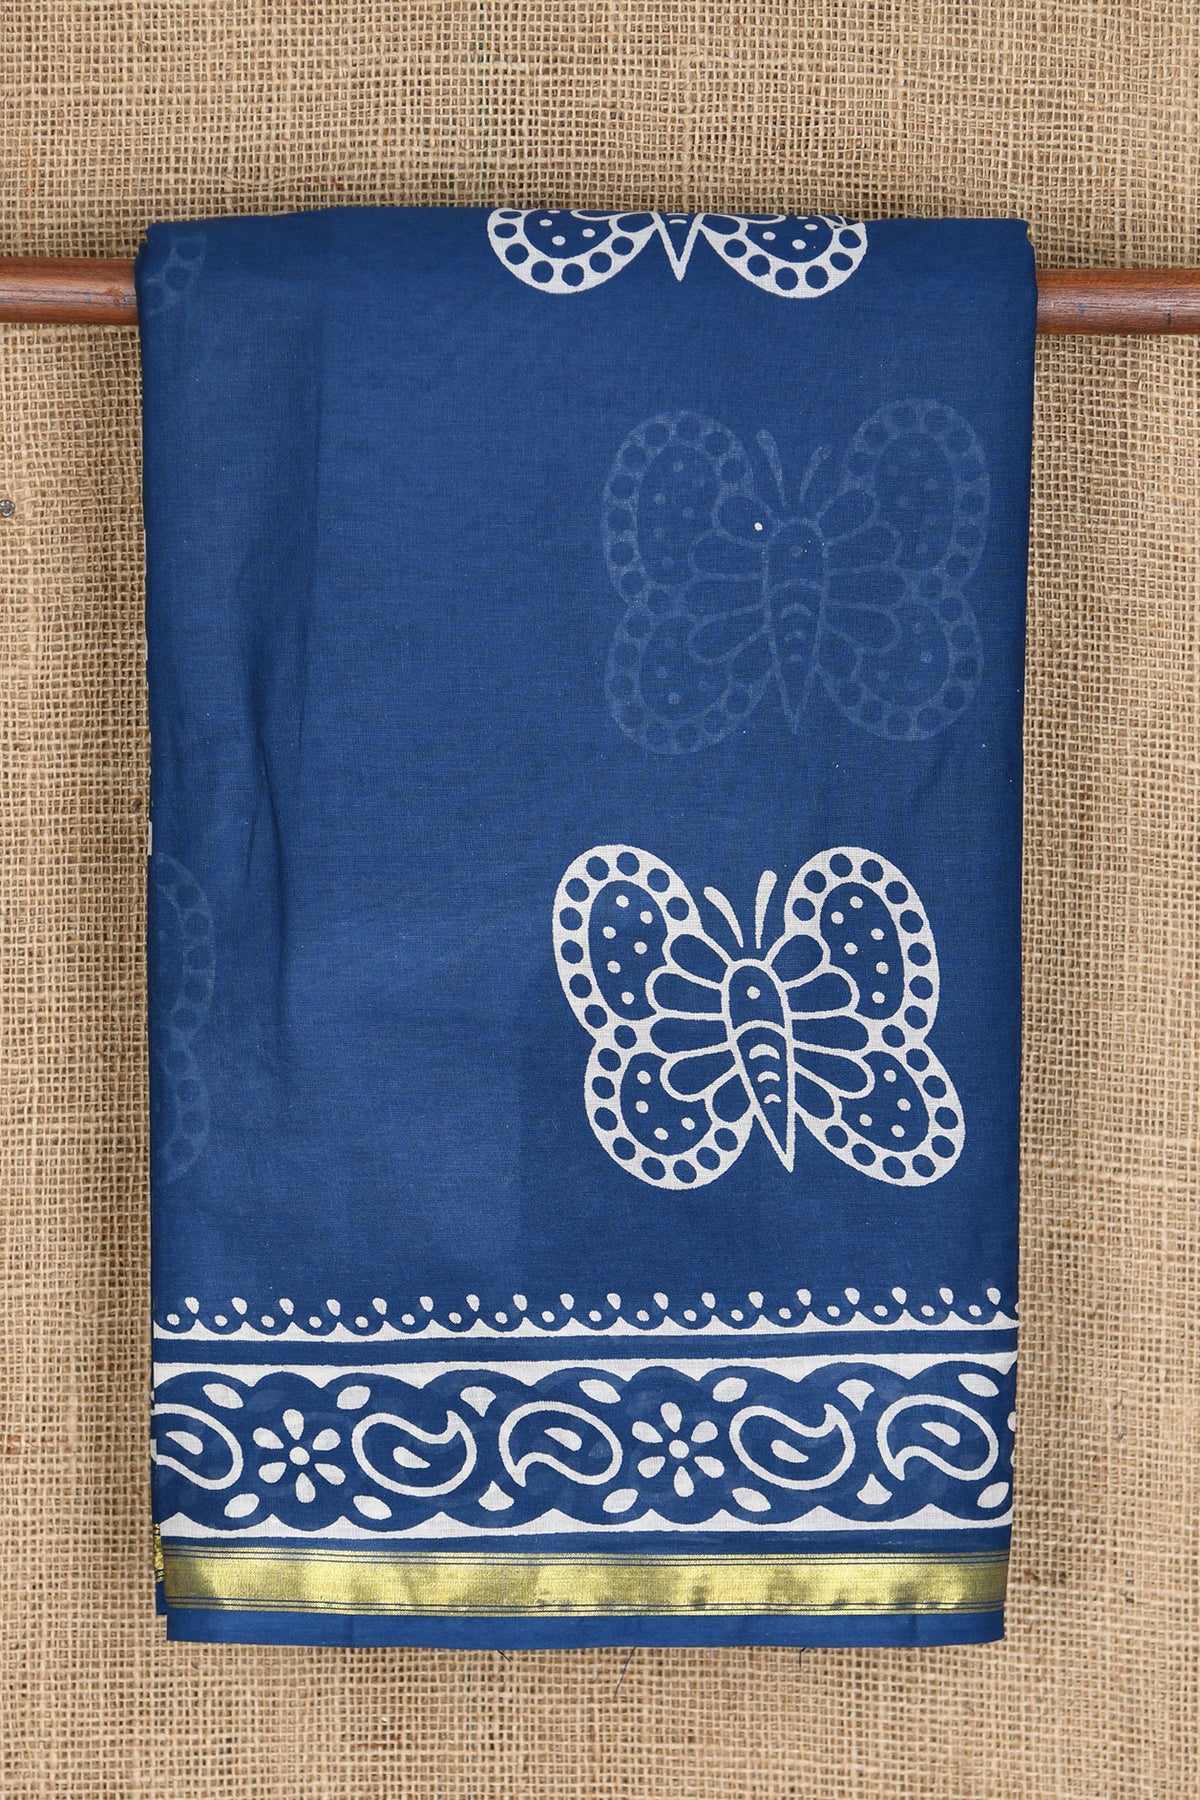 Zari Border With Butterfly Design Navy Blue Ahmedabad Cotton Saree